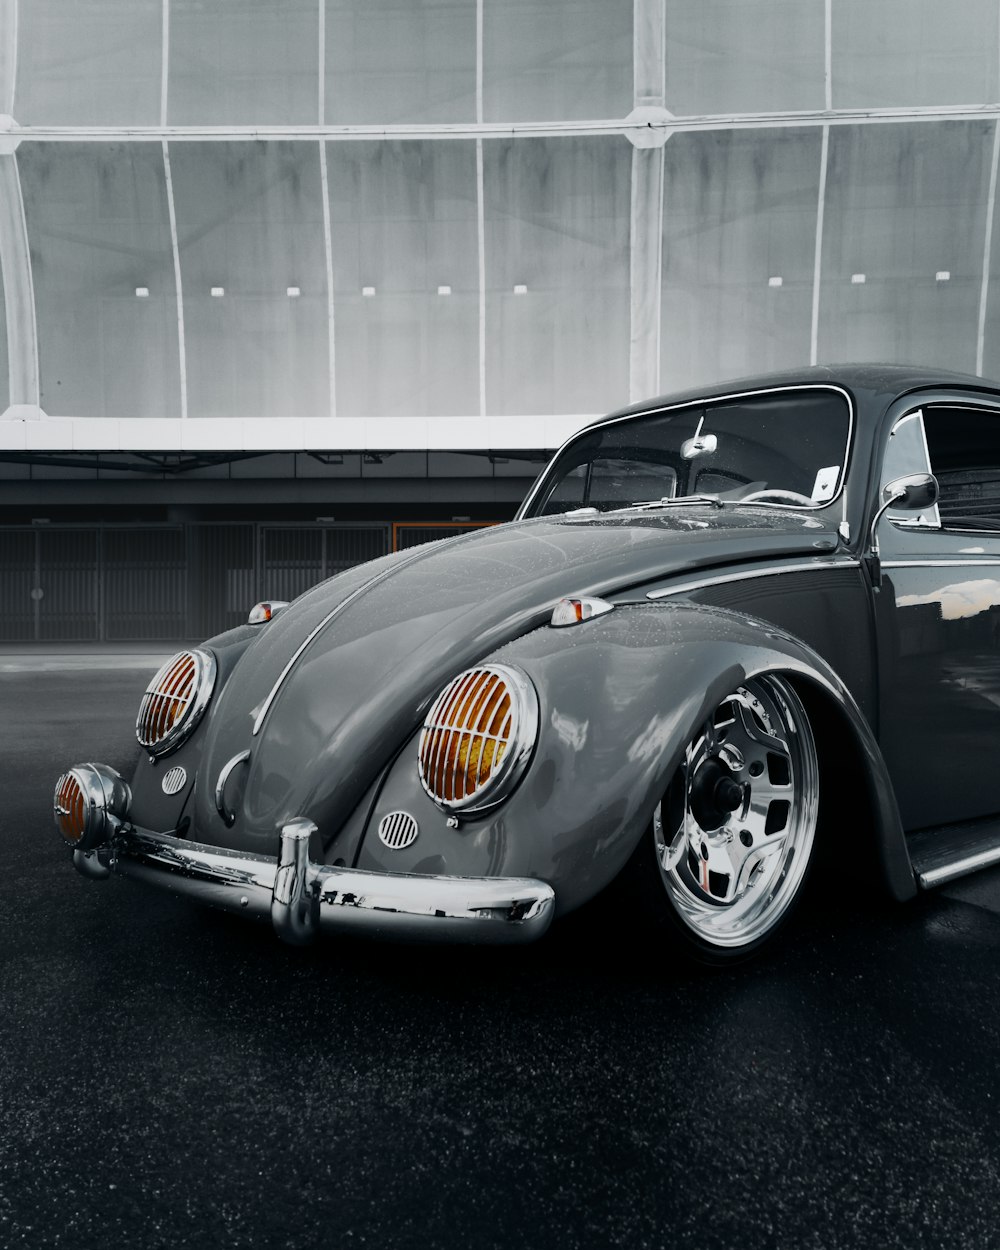 a gray vw bug is parked in a parking lot